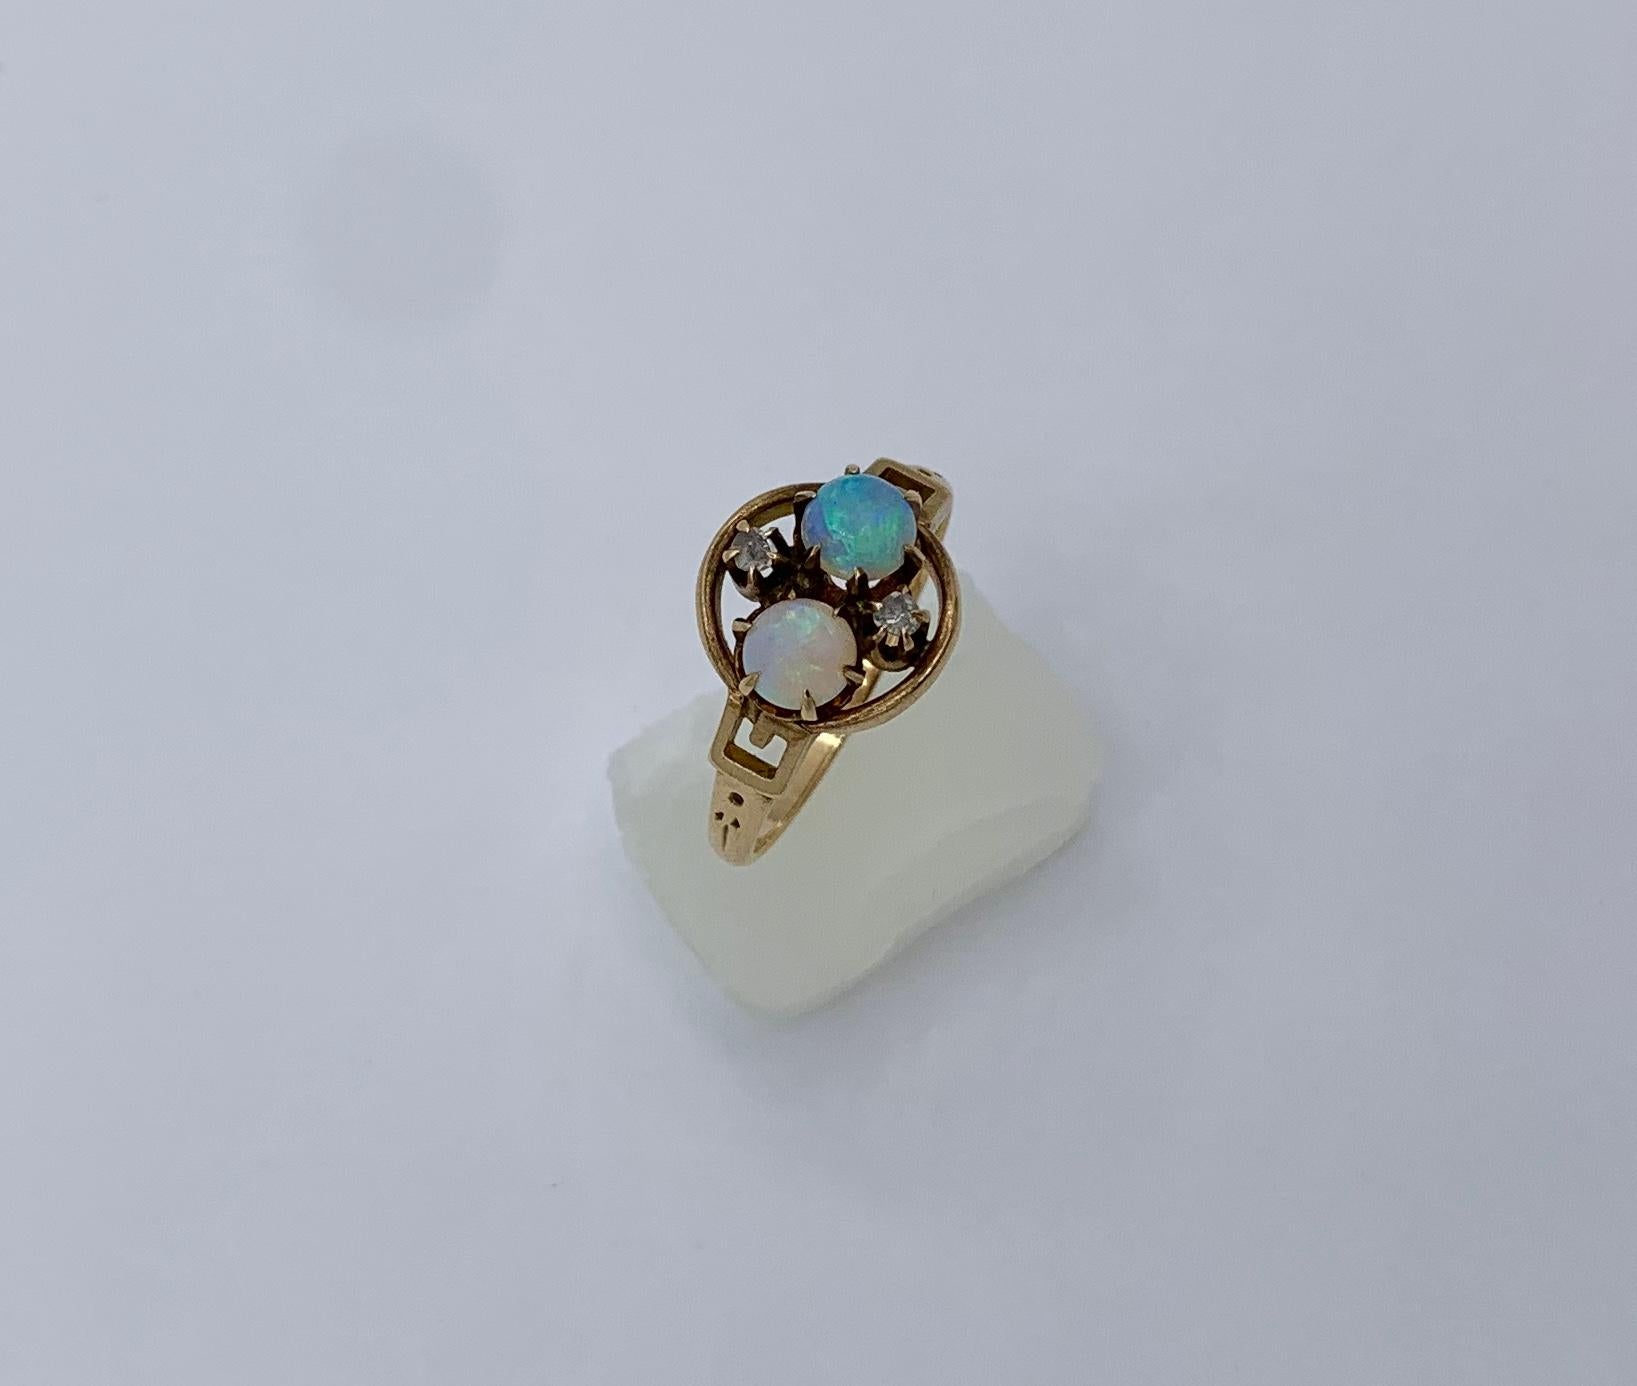 An Antique Victorian - Art Deco Ring with two gorgeous natural round Opals and two Old Mine Cut Diamonds of stunning beauty. The opals have yellow, green, and blue fire.  The two Opal gems are accented by two sparkling Old Mine Cut Diamonds.   The